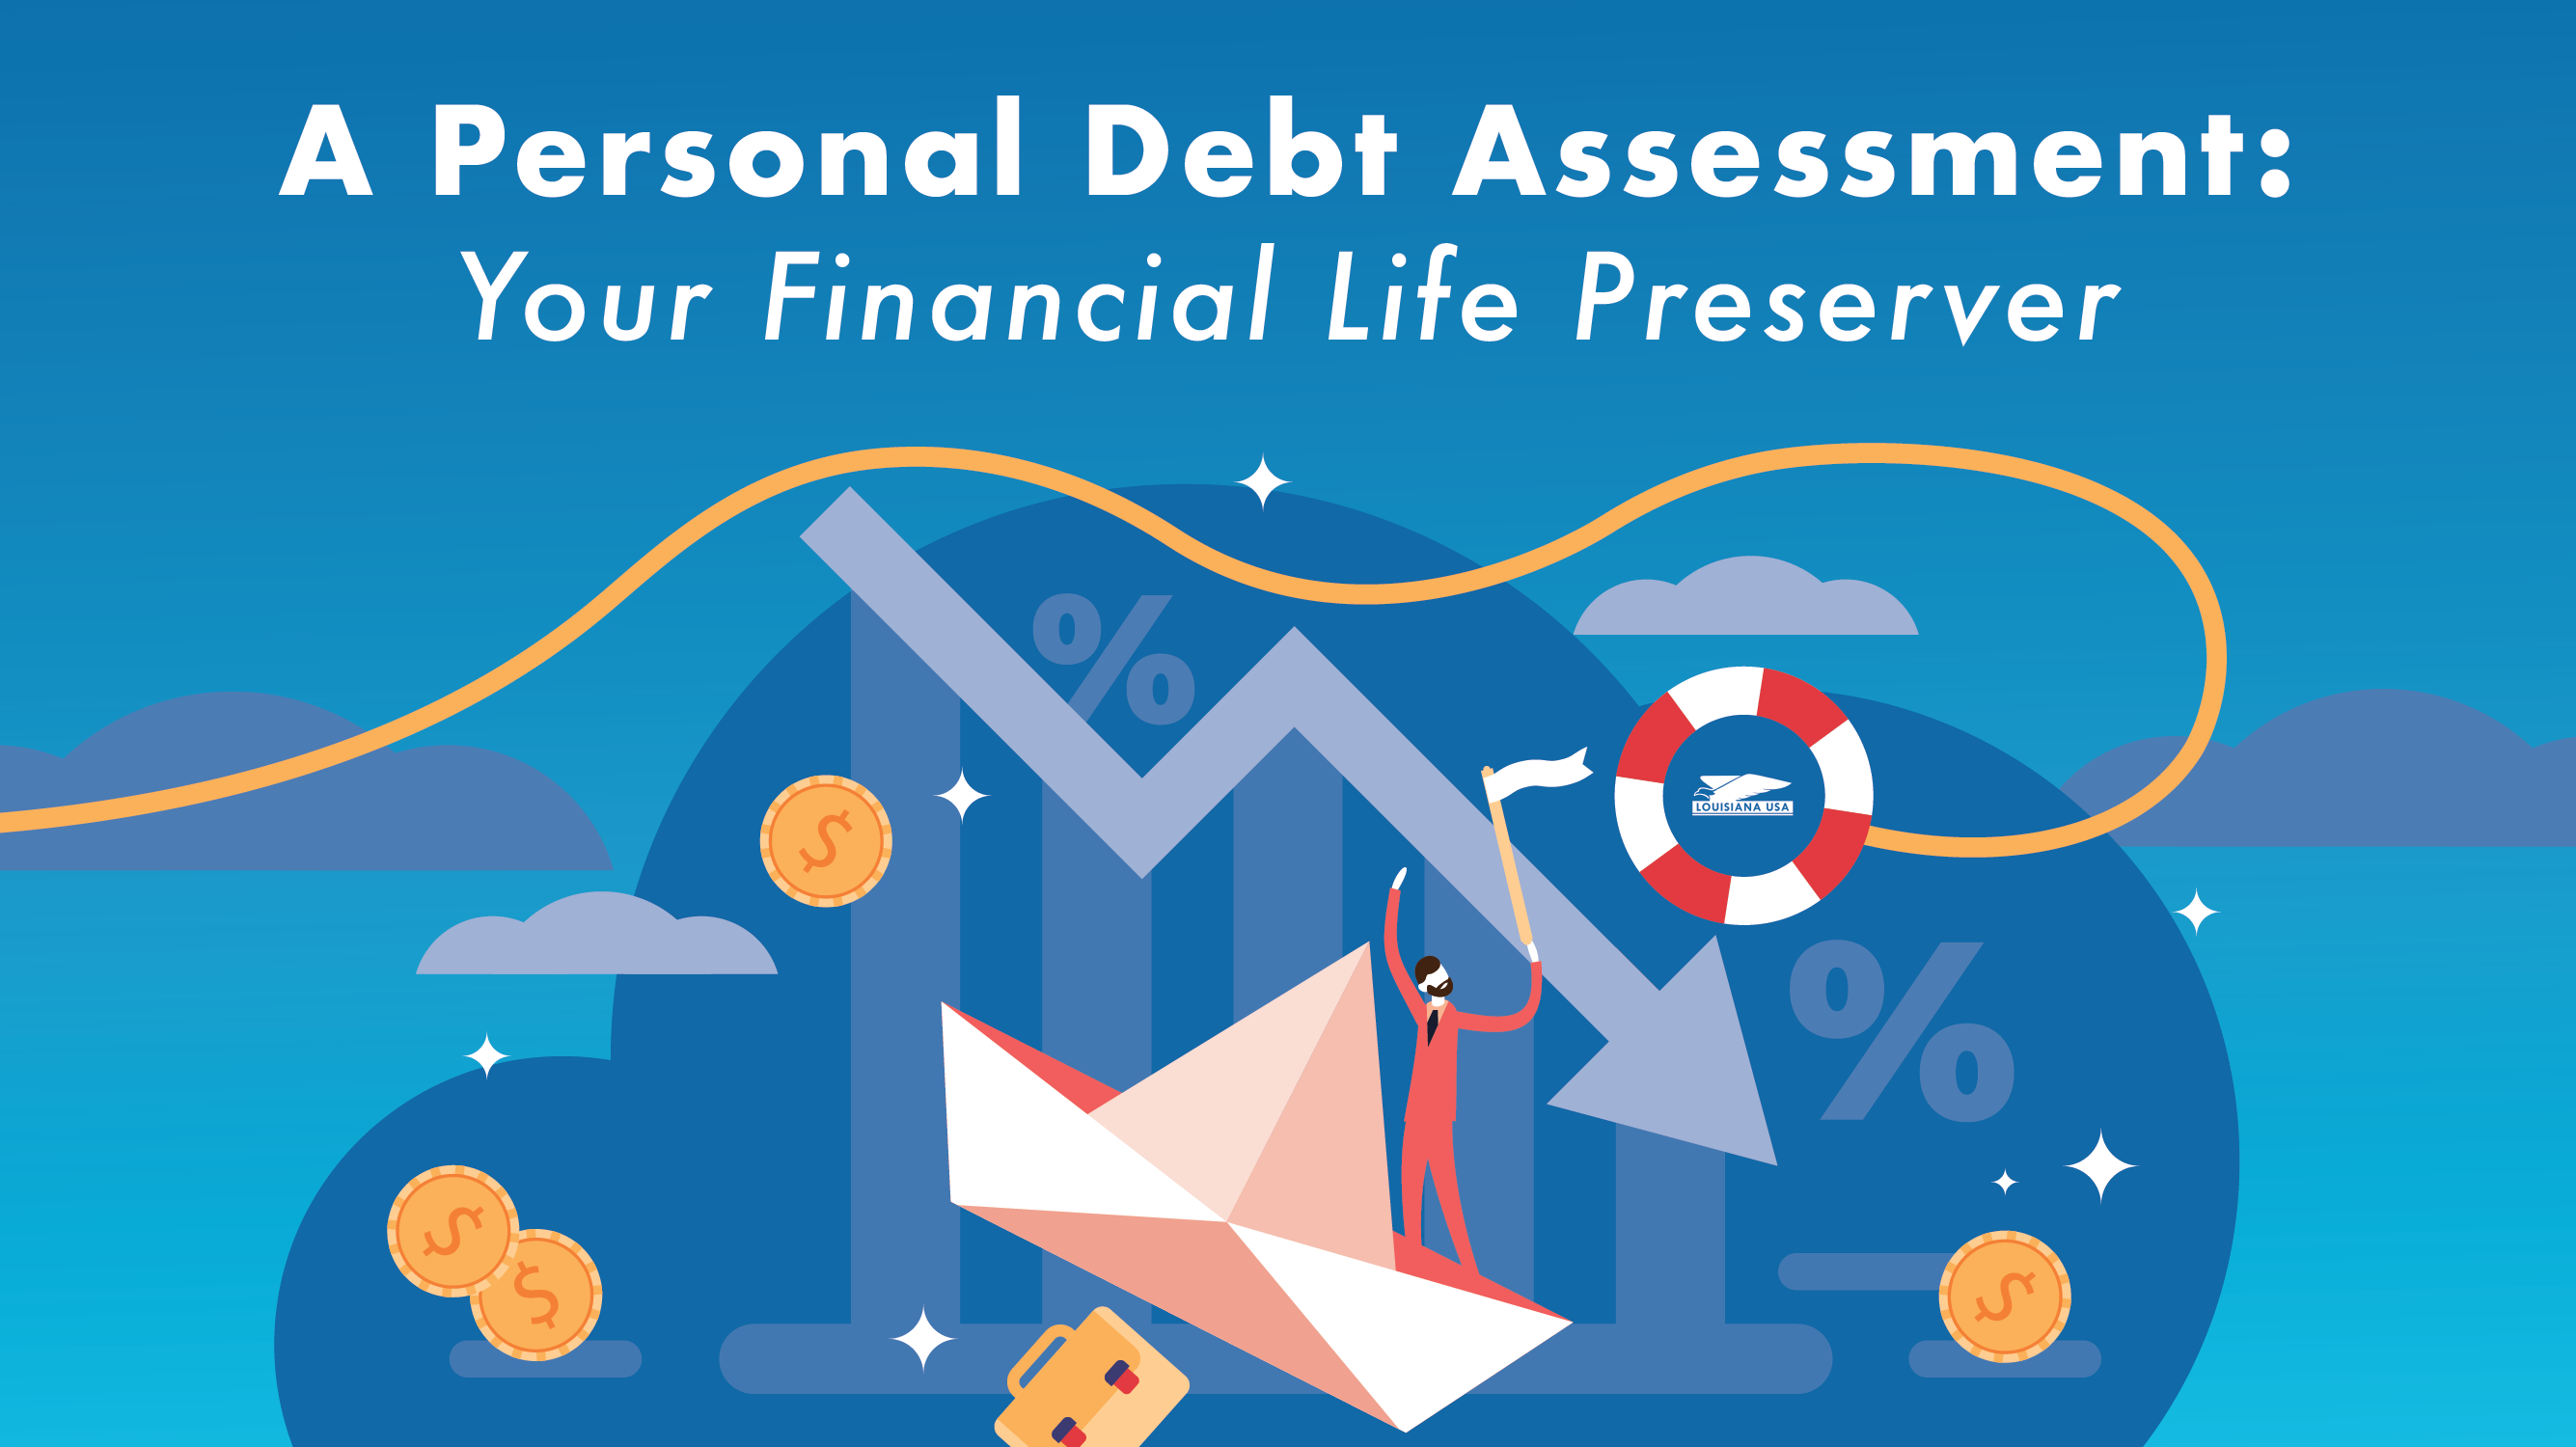 A Personal Debt Assessment: Your Financial Life Preserver